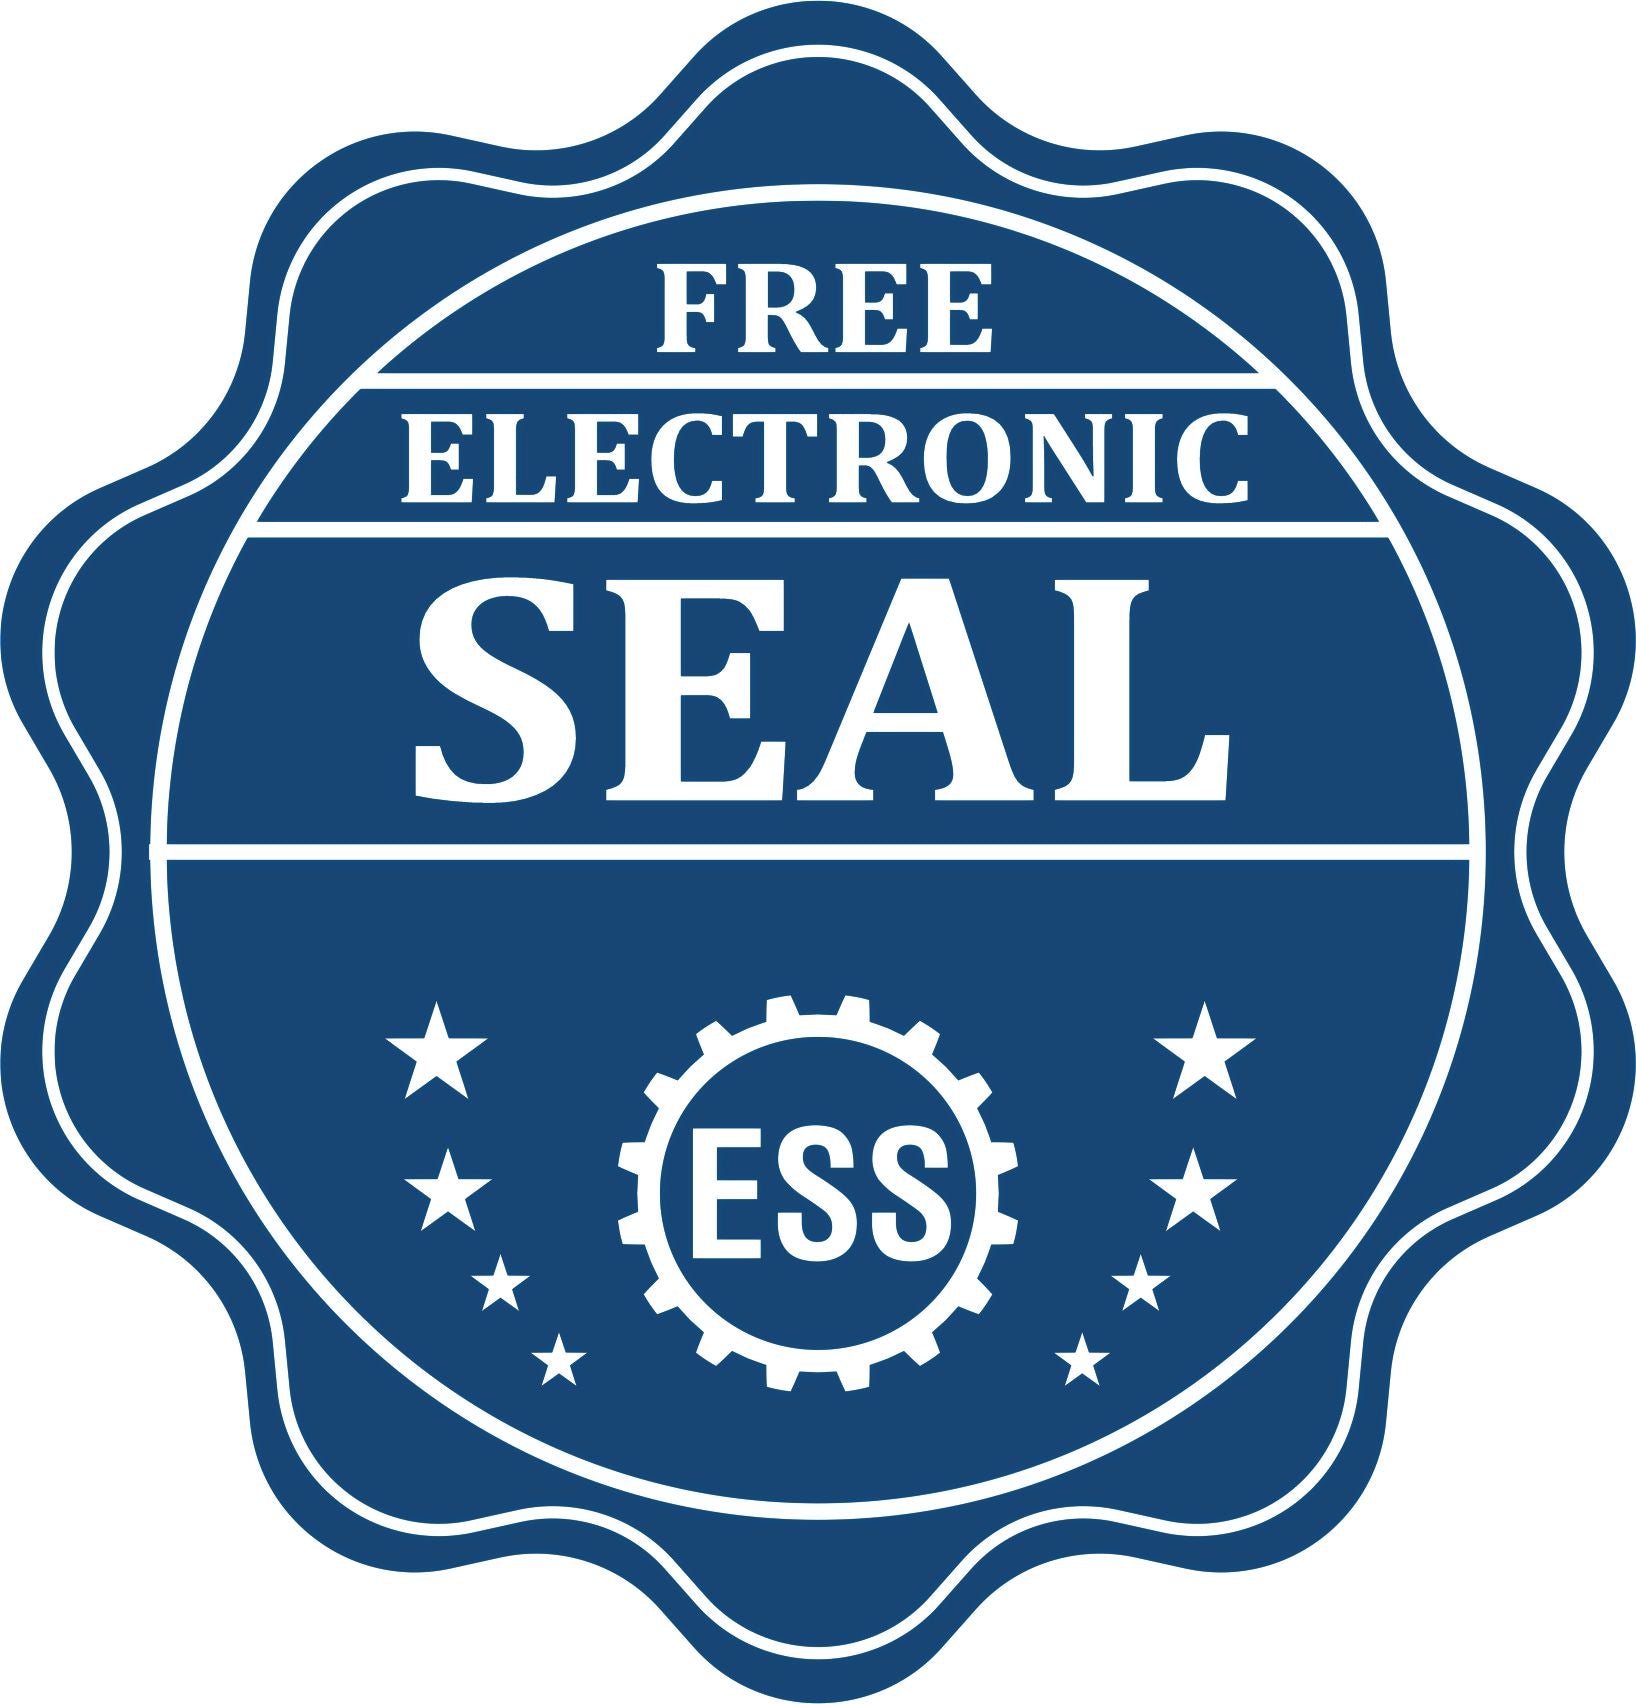 A badge showing a free electronic seal for the Long Reach Hawaii Geology Seal with stars and the ESS gear on the emblem.